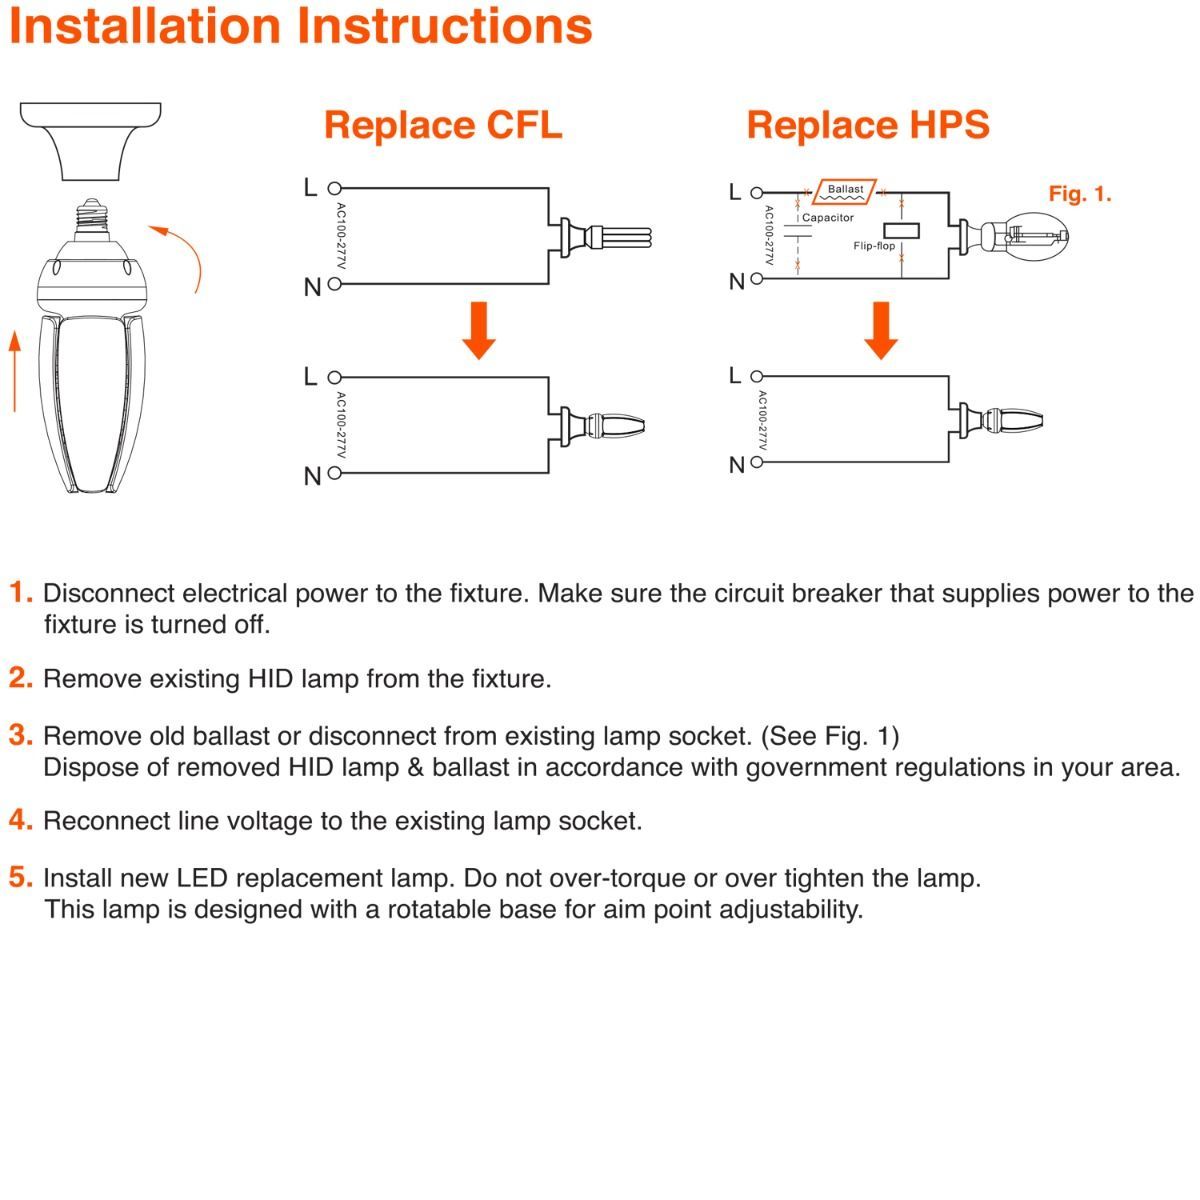 LED acorn installation instructions. Five easy steps.